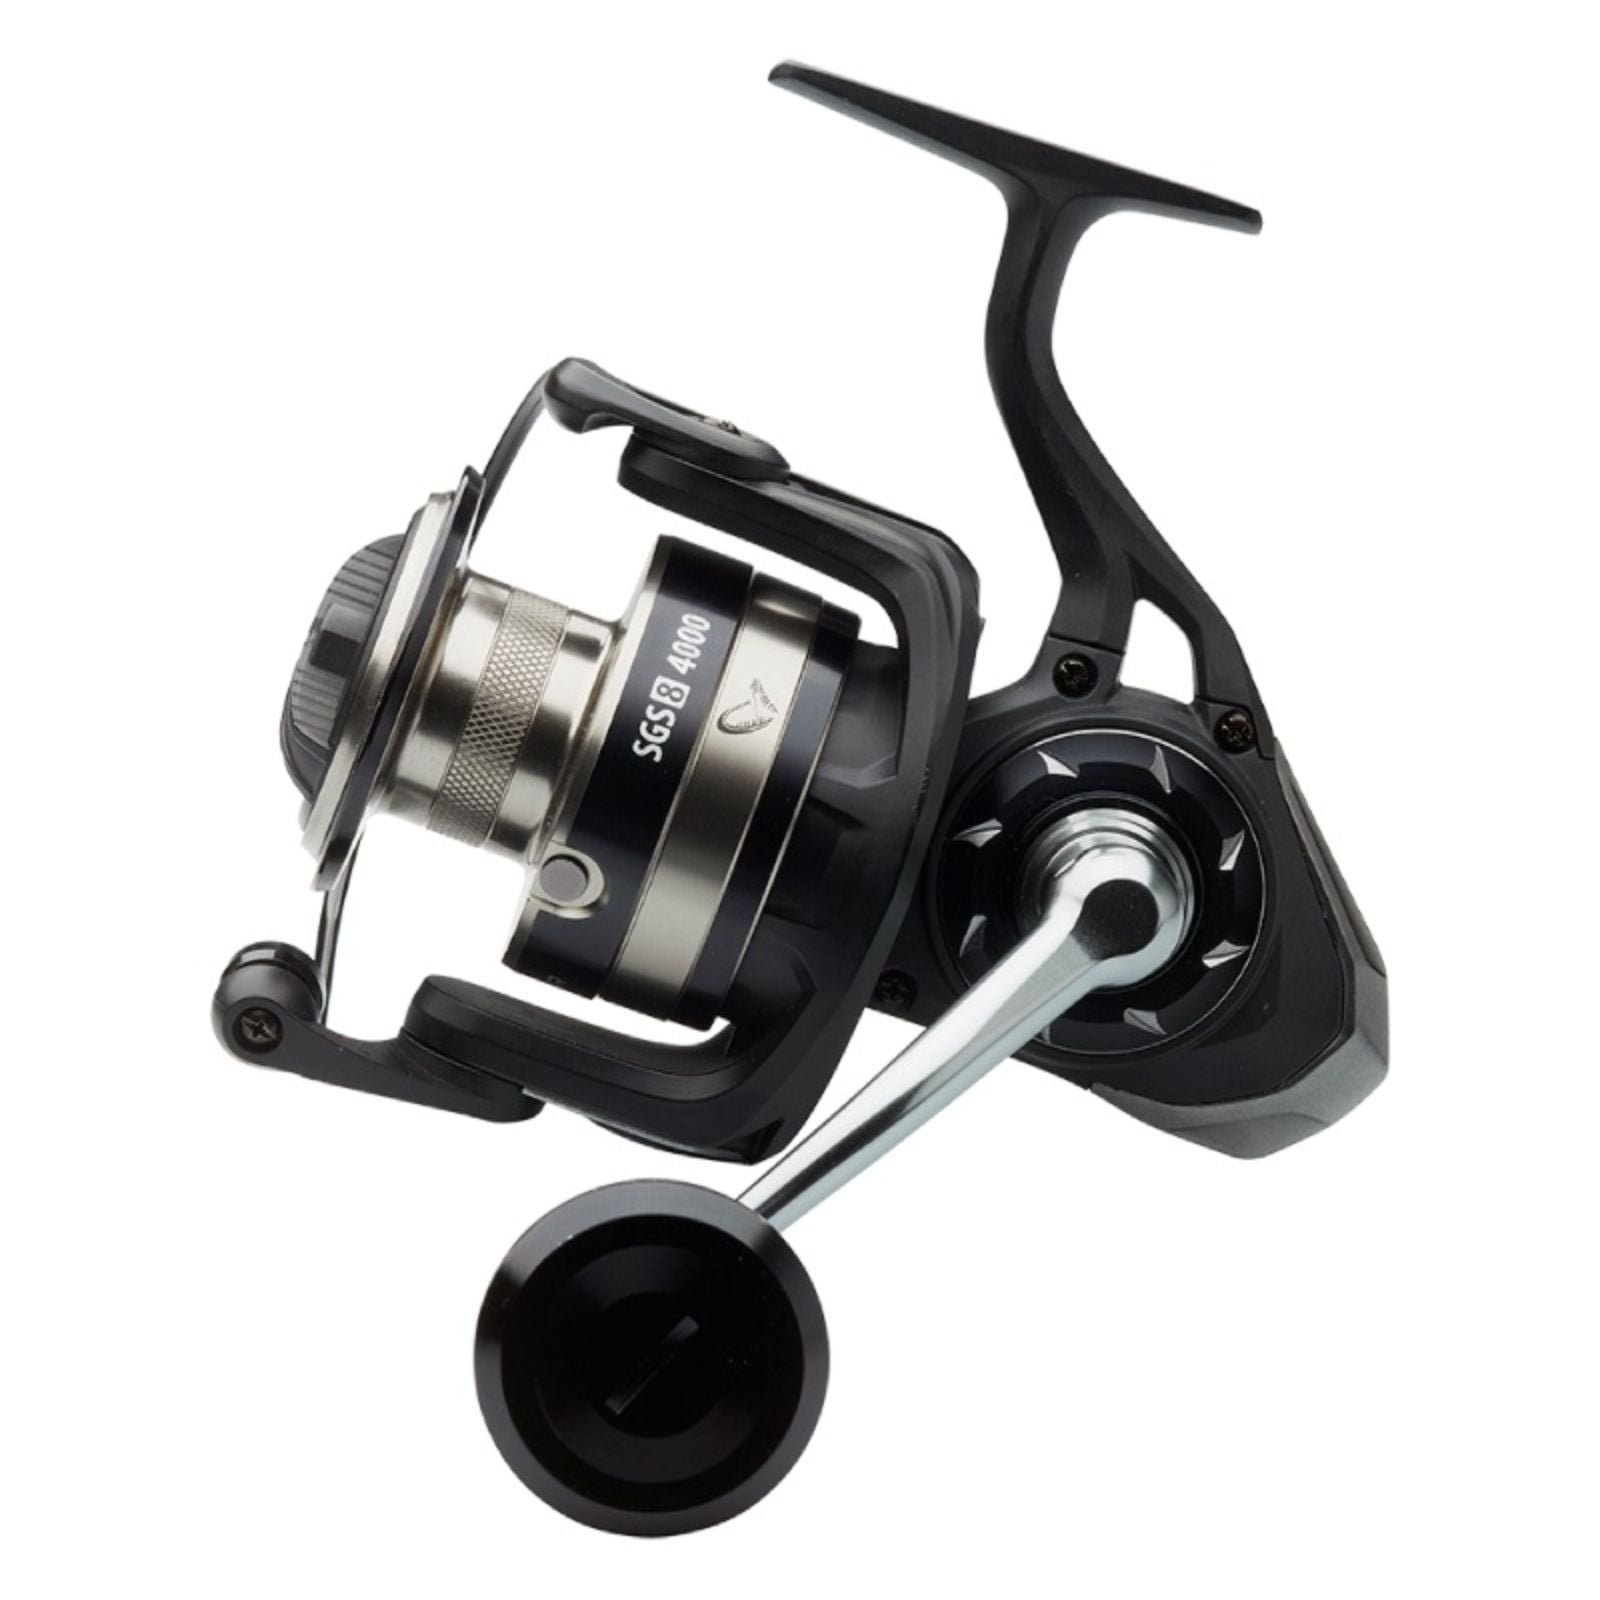 Savage Gear 3762 SGS8 Spinning Reel Size 6000 Front Drag 8+1 BB 280yd 